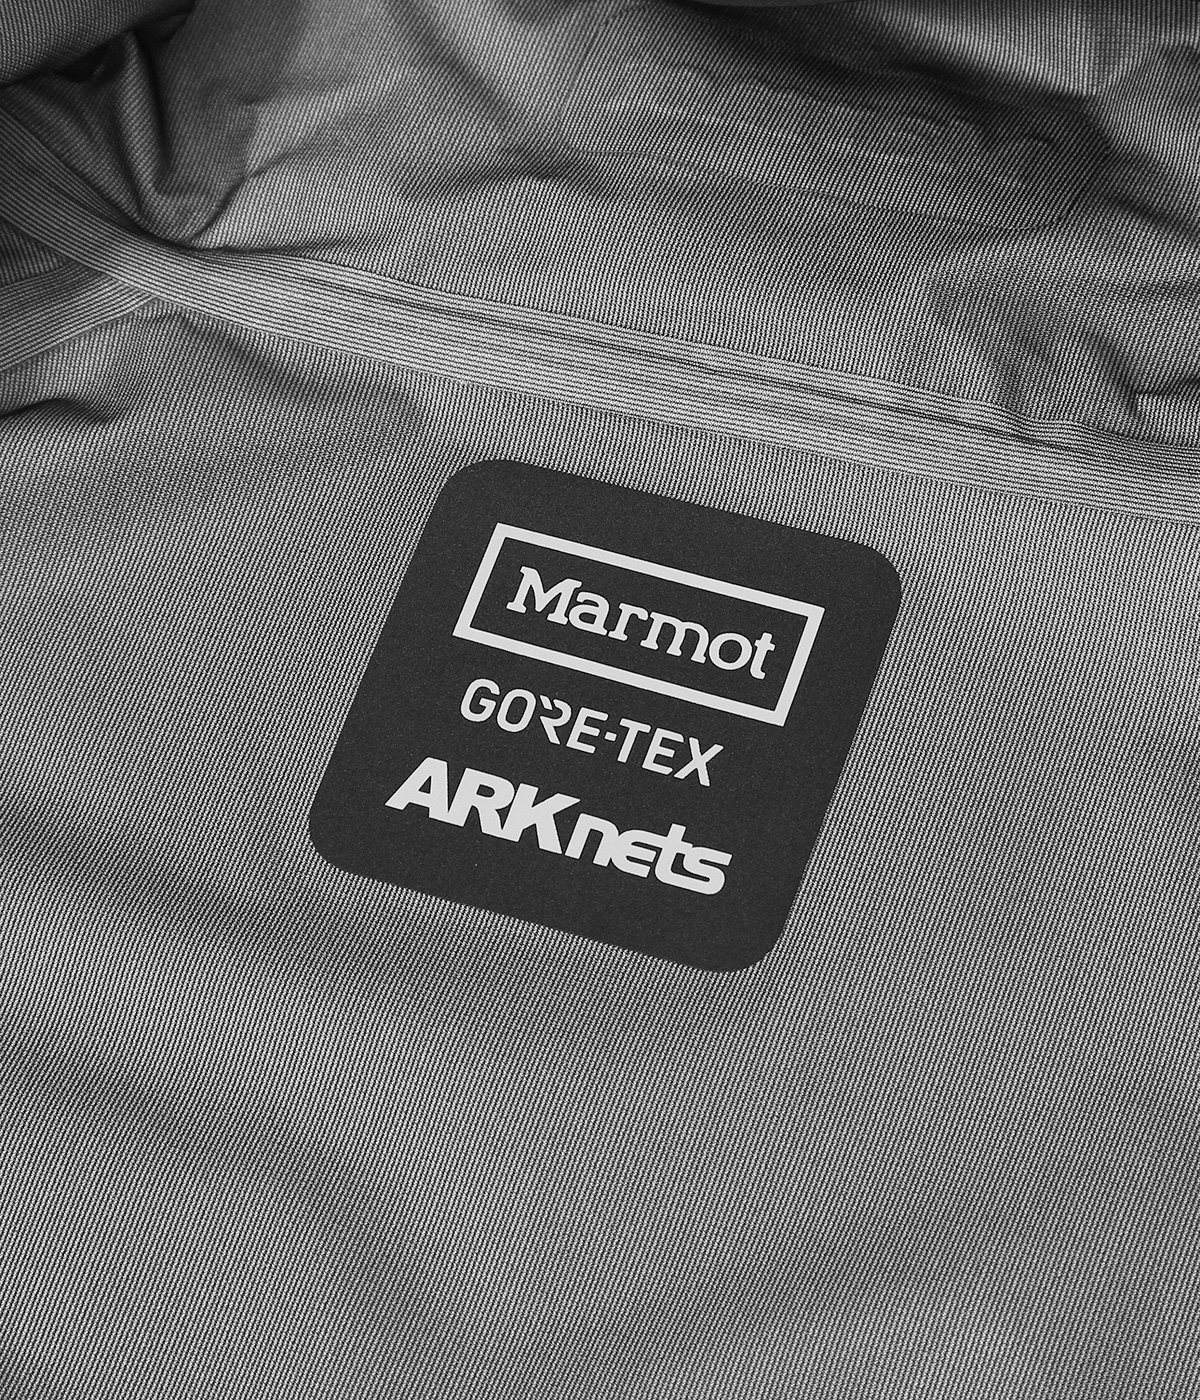 ONLY ARK】別注 GORE-TEX 3L A Jacket | Marmot(マーモット